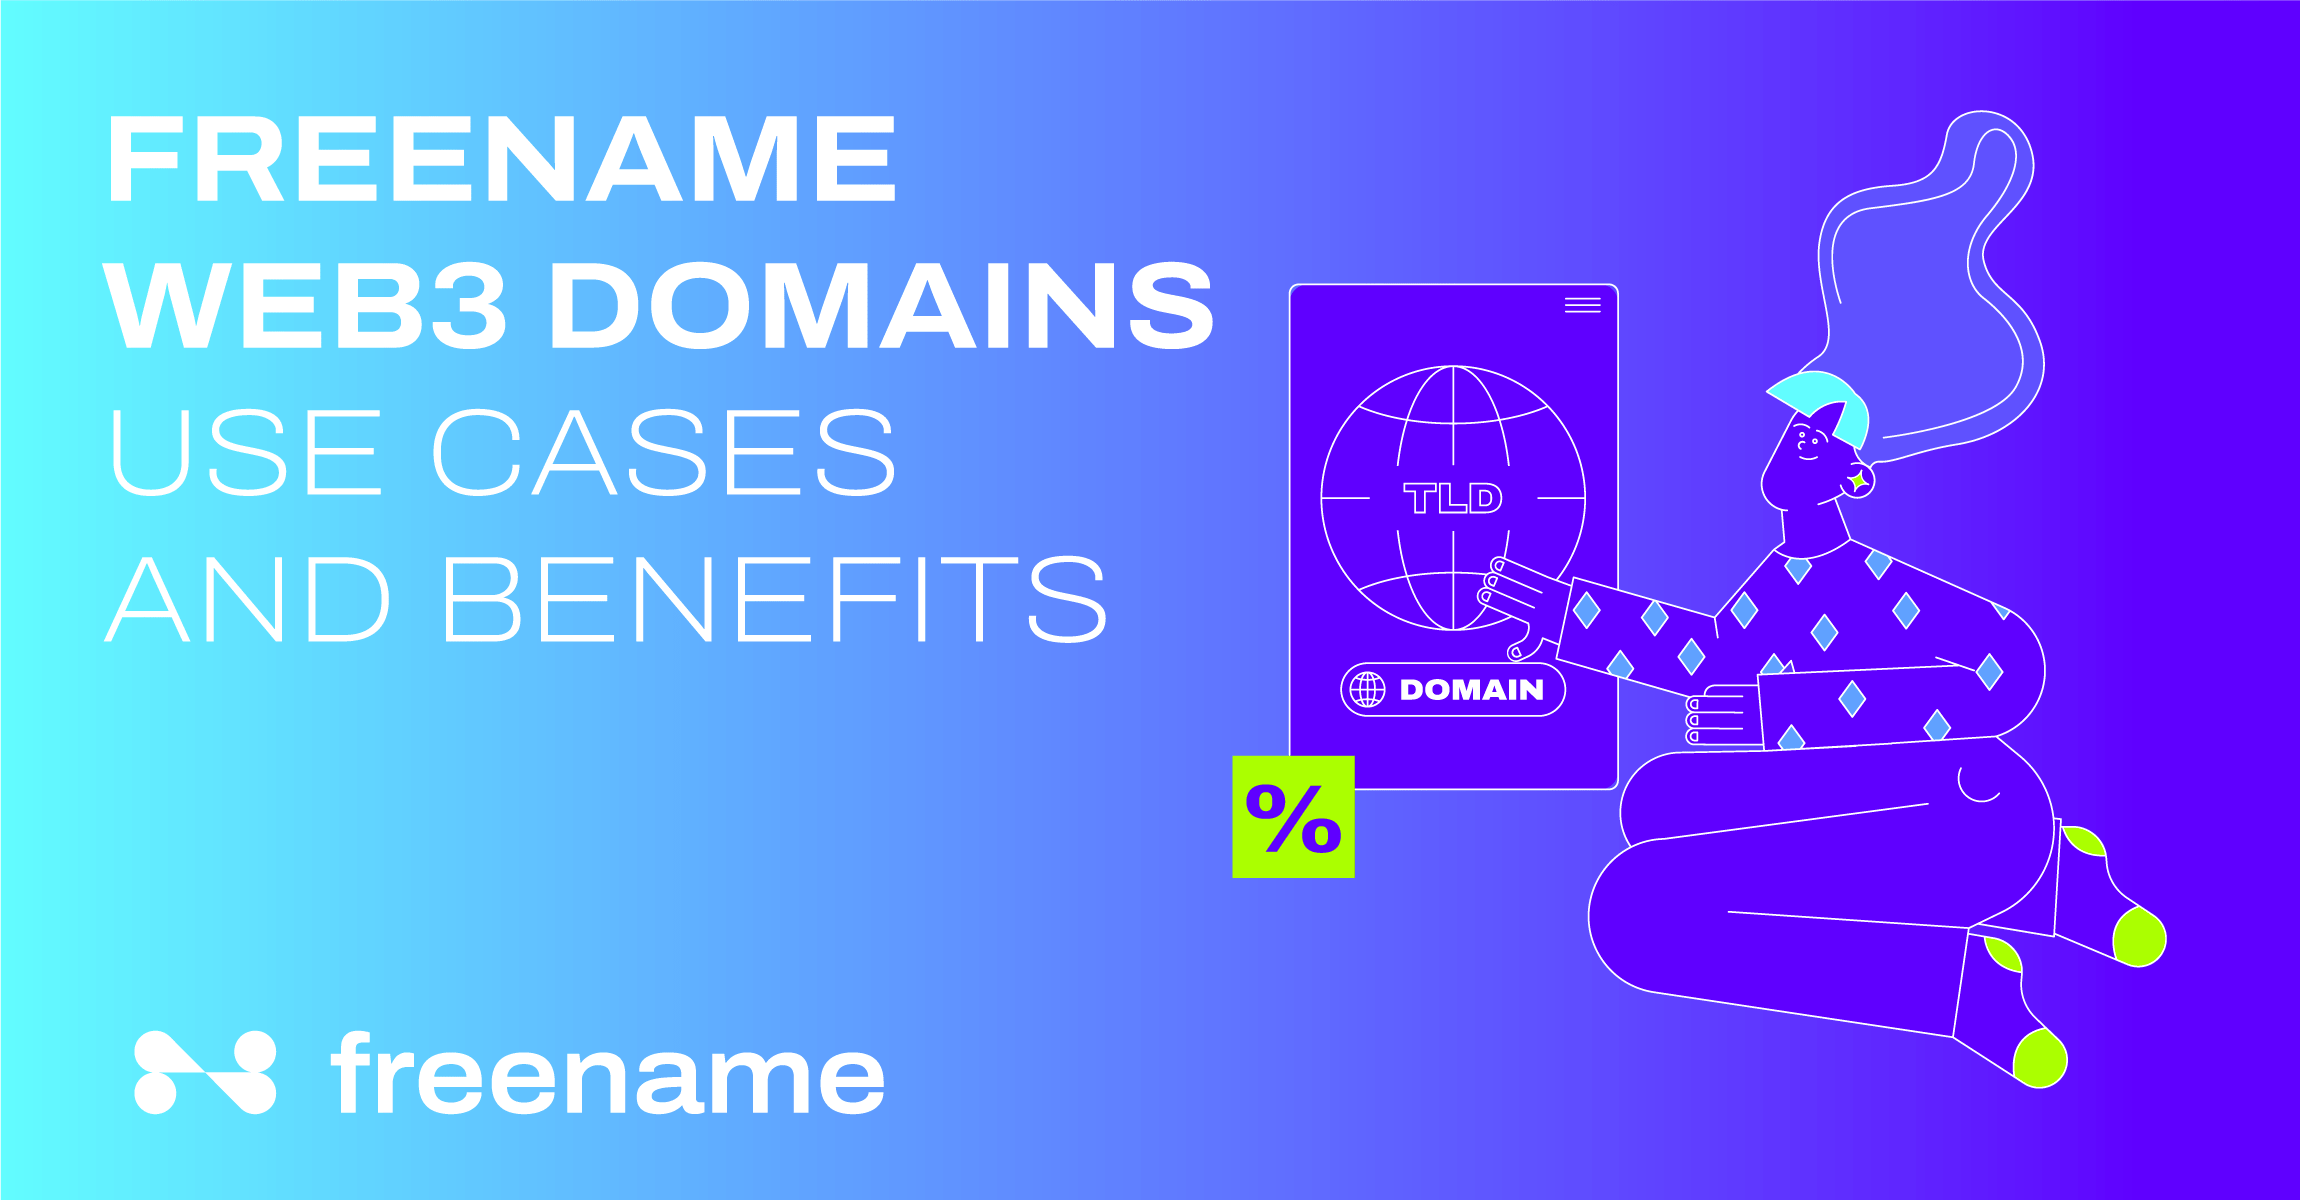 Freename Web3 Domains Use Cases and Benefits